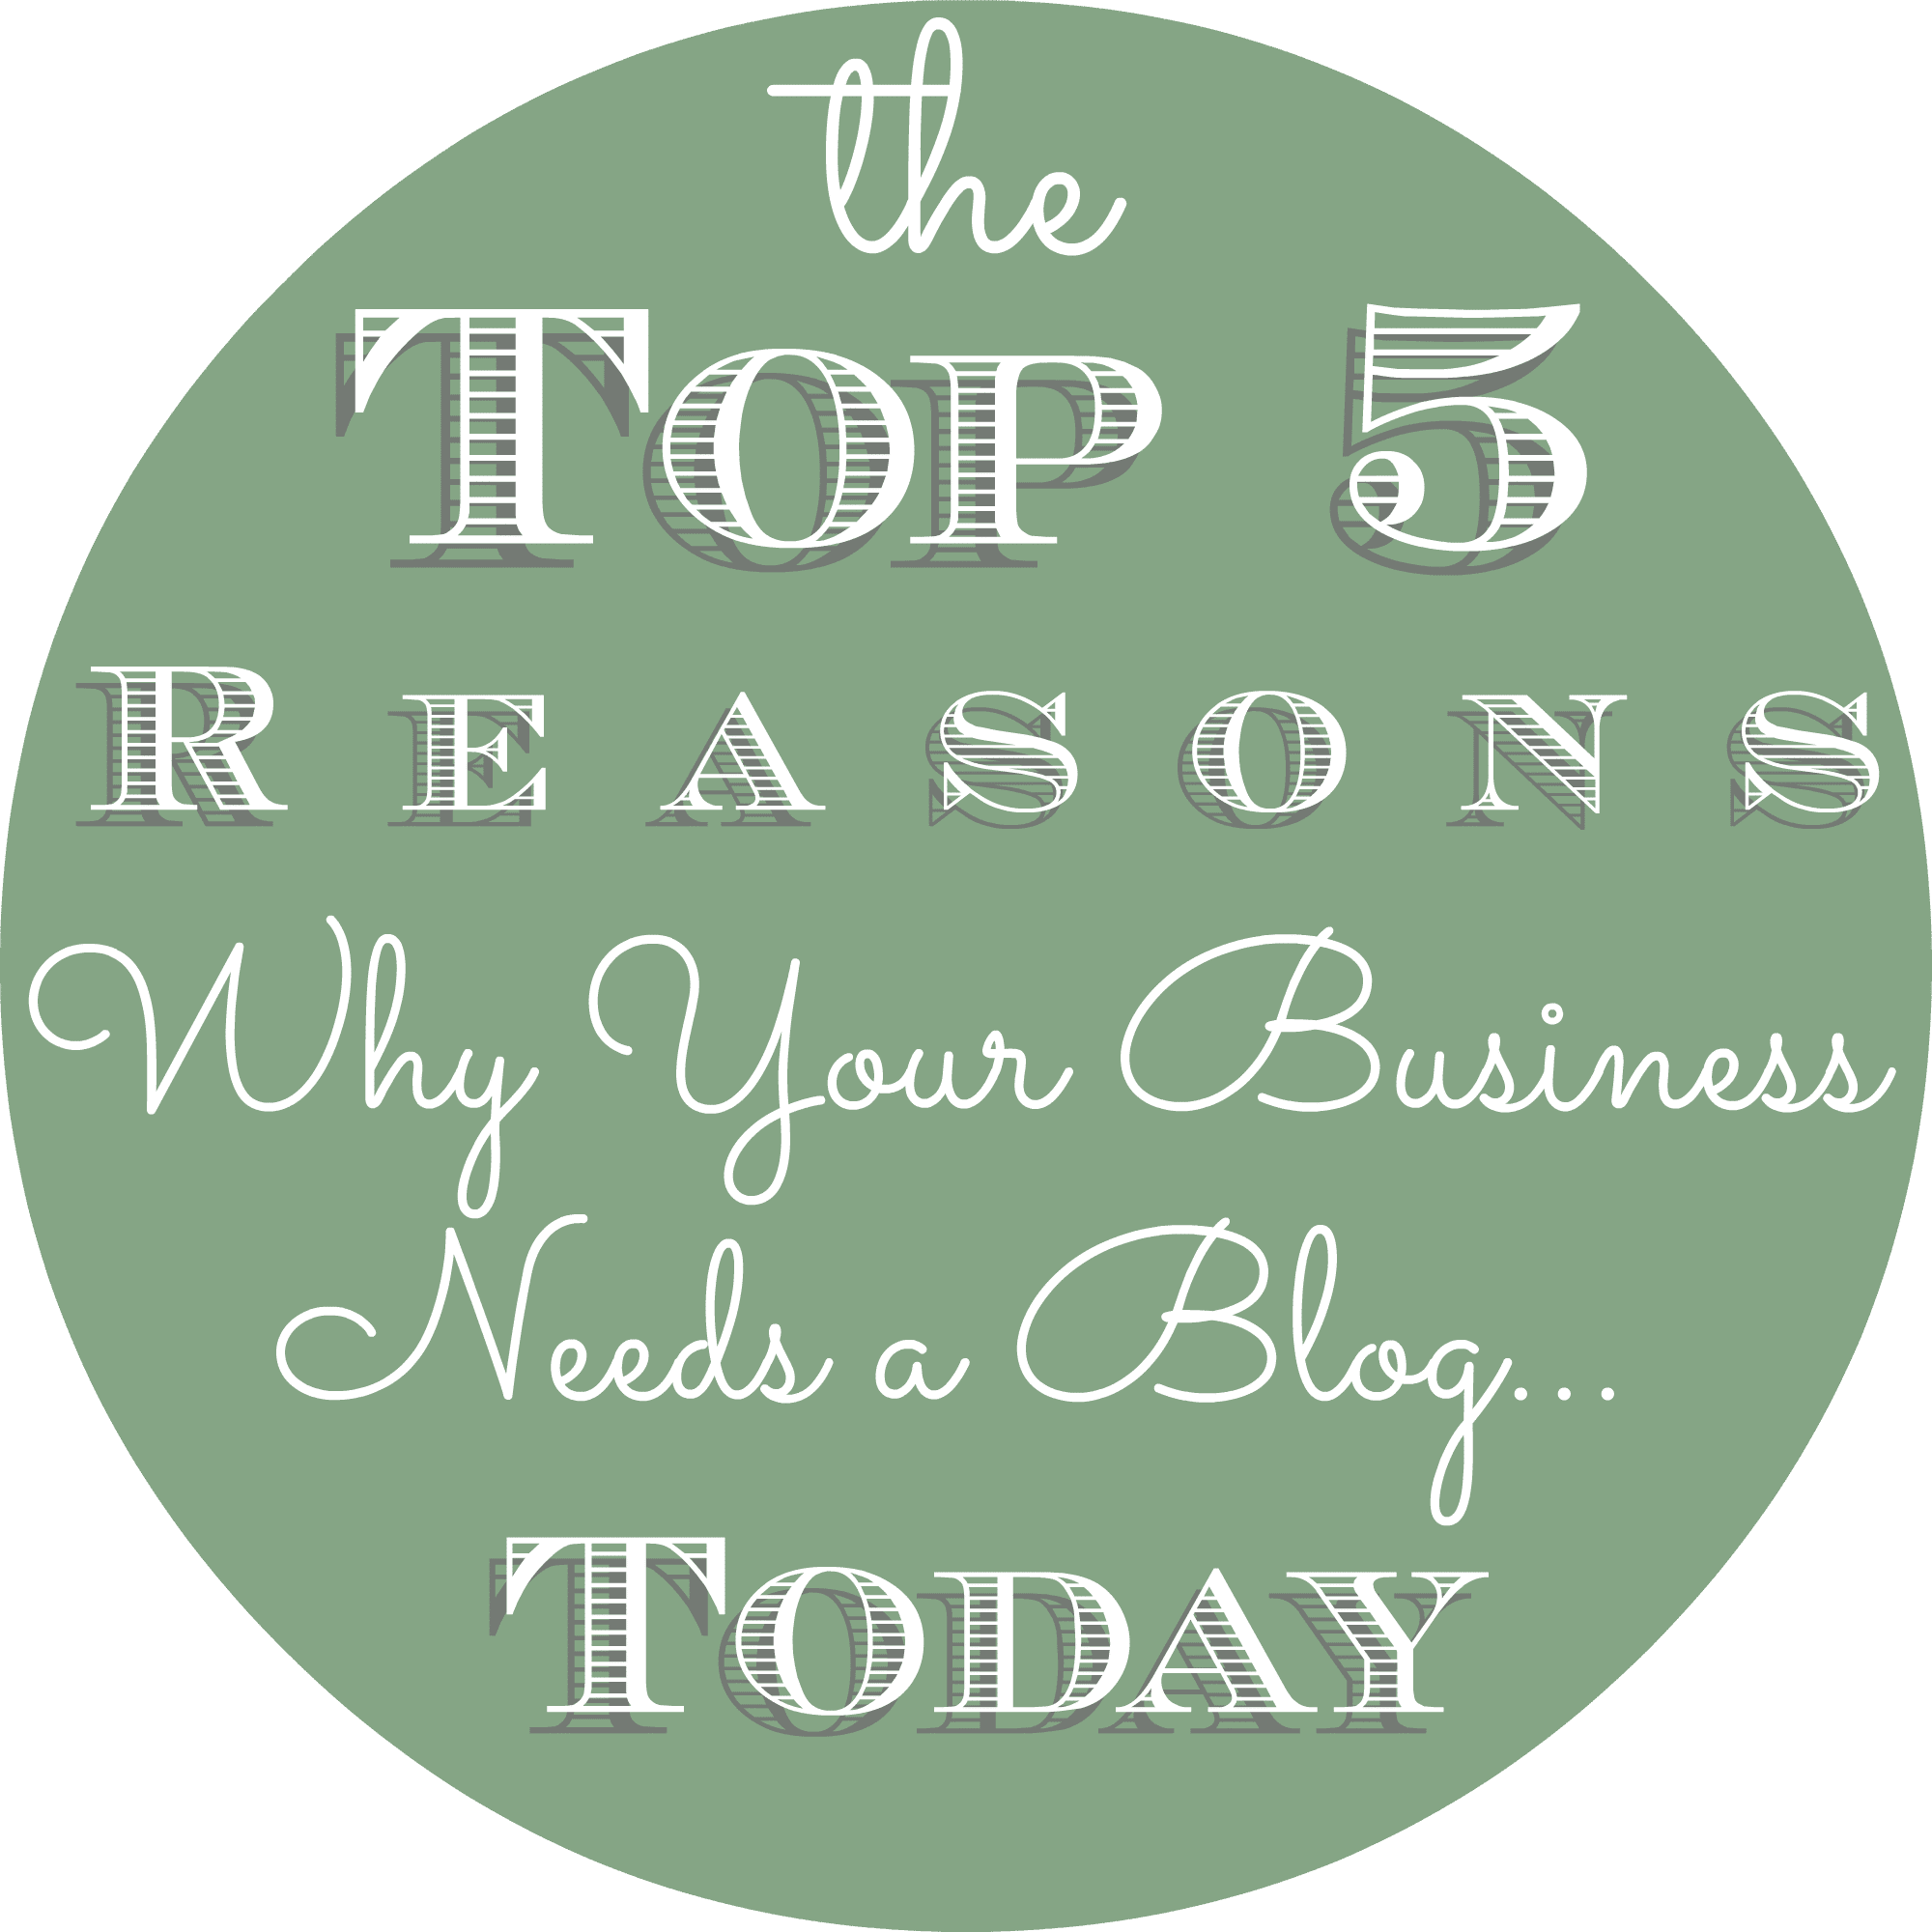 The Top 5 Reasons Why Your Business Needs a Blog...Today #iwantclarity